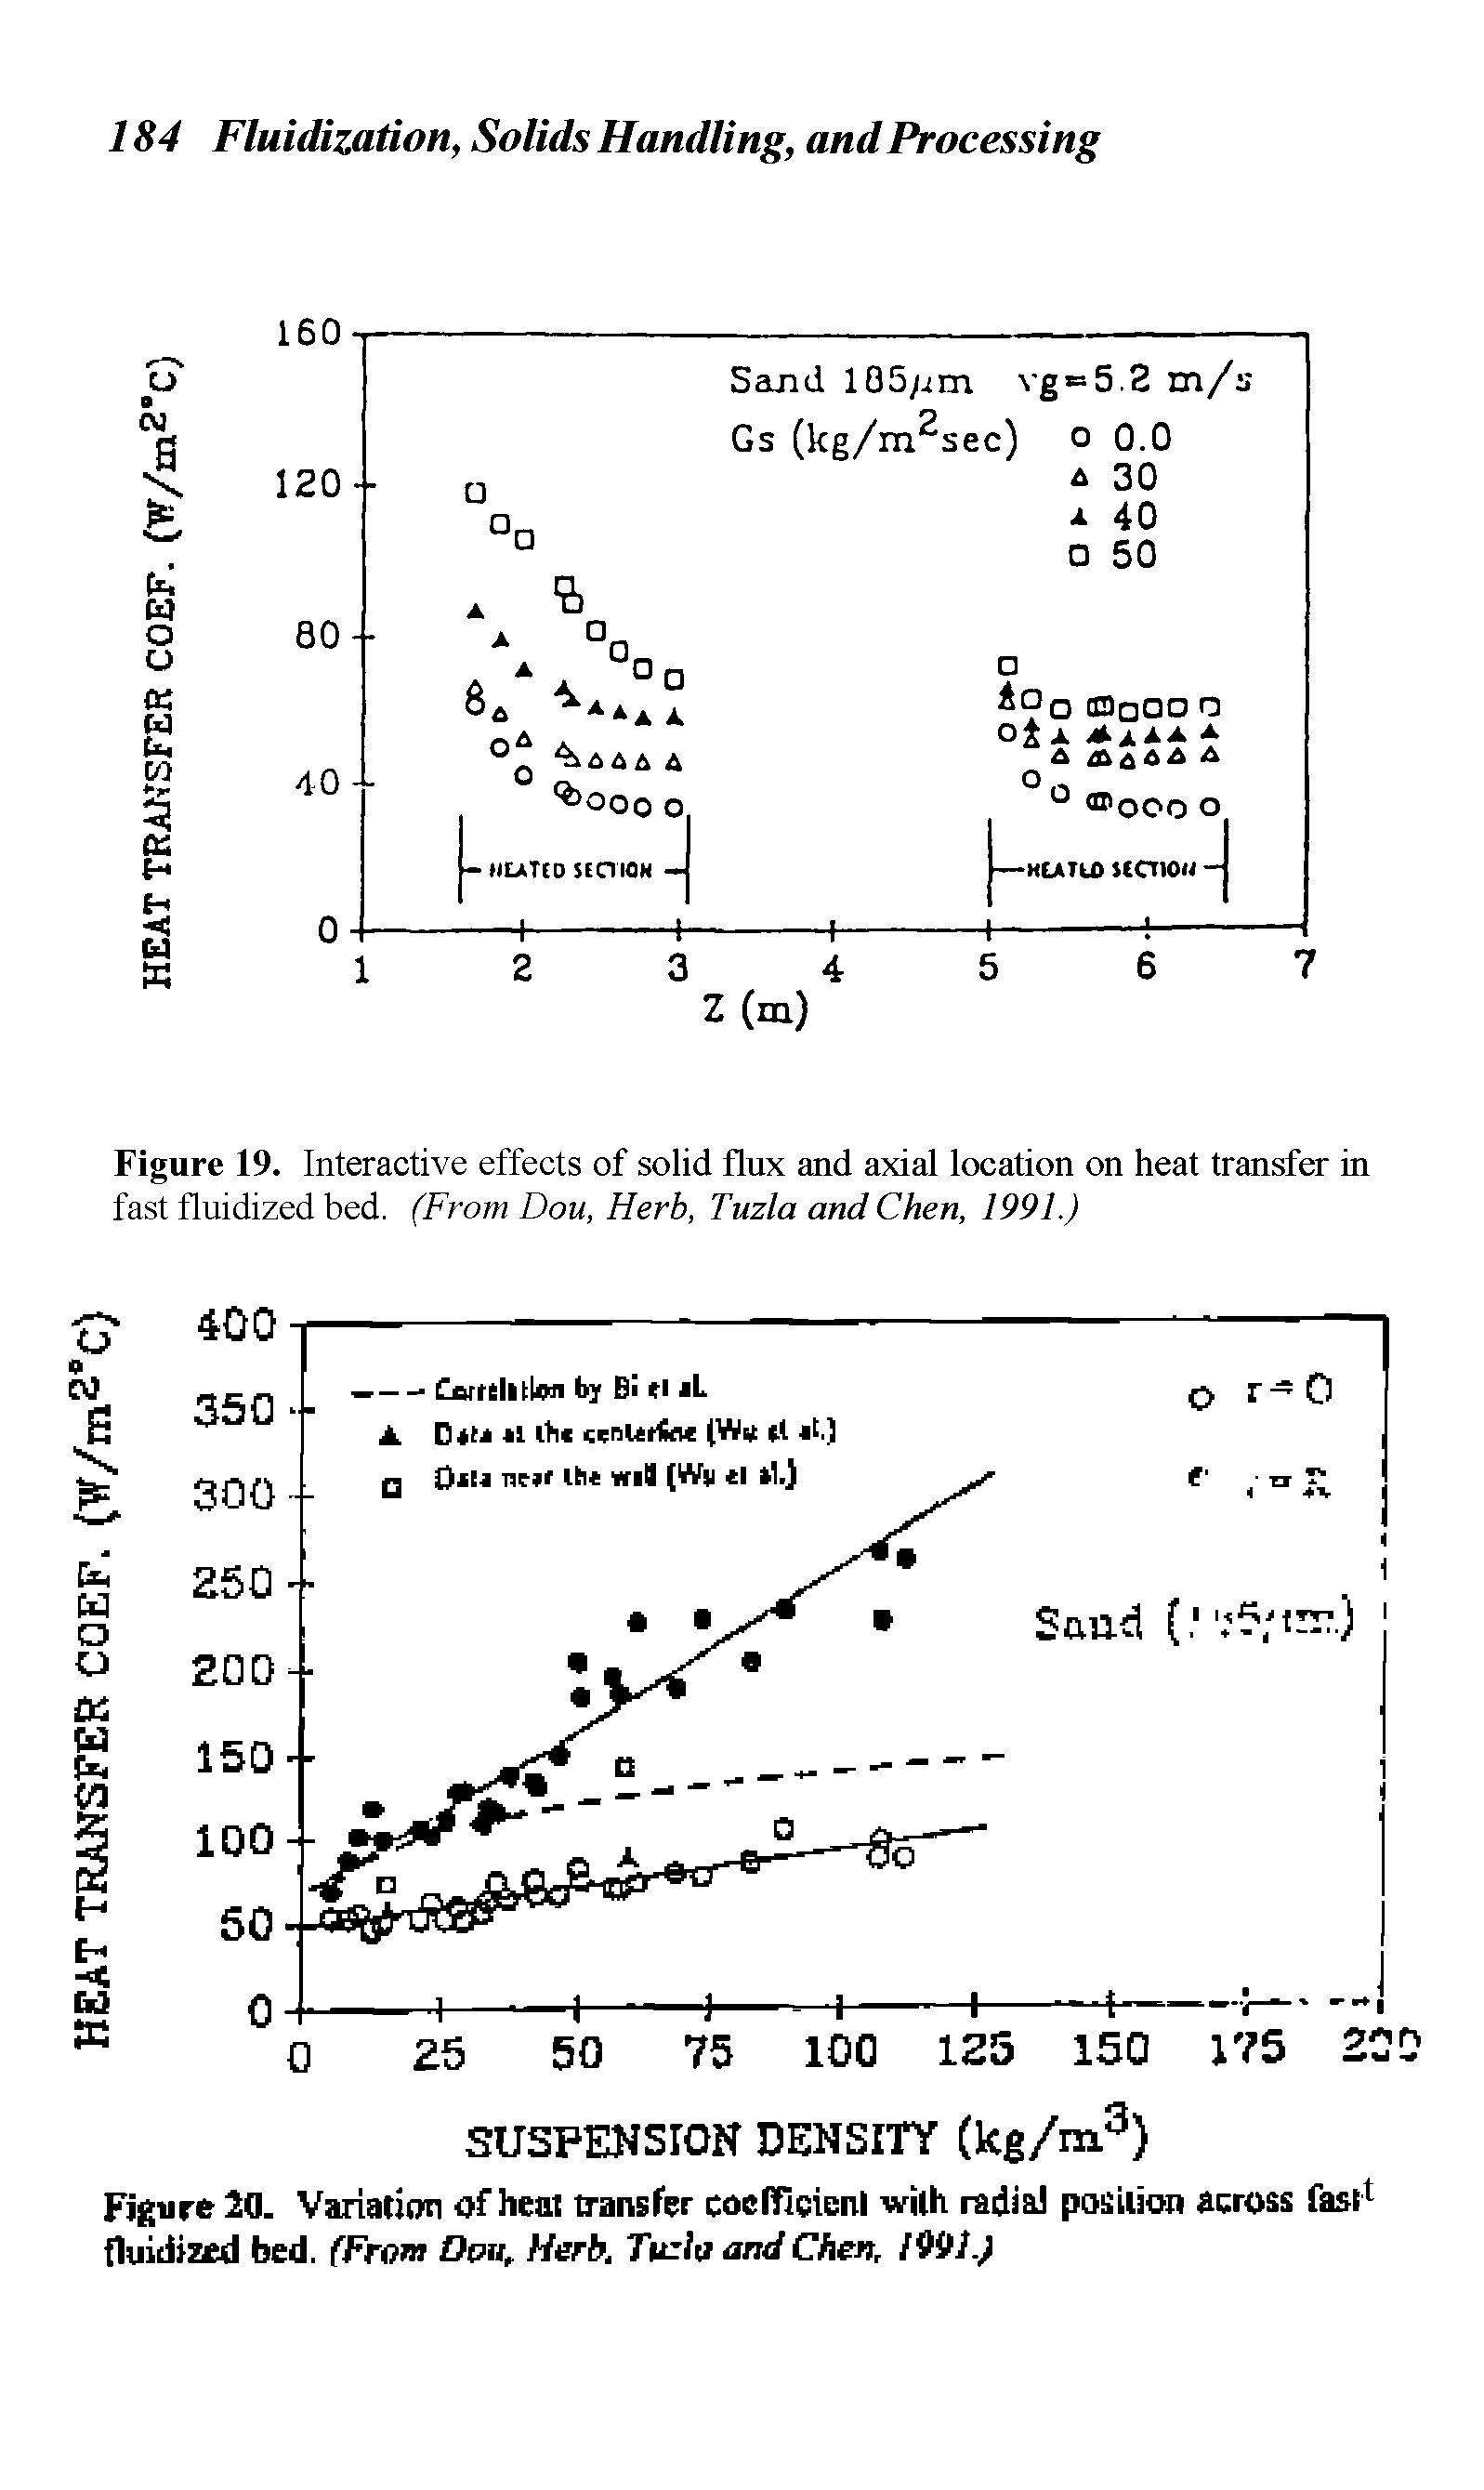 Figure 19. Interactive effects of solid flux and axial location on heat transfer in fast fluidized bed. (From Dou, Herb, Tuzla and Chen, 1991.)...